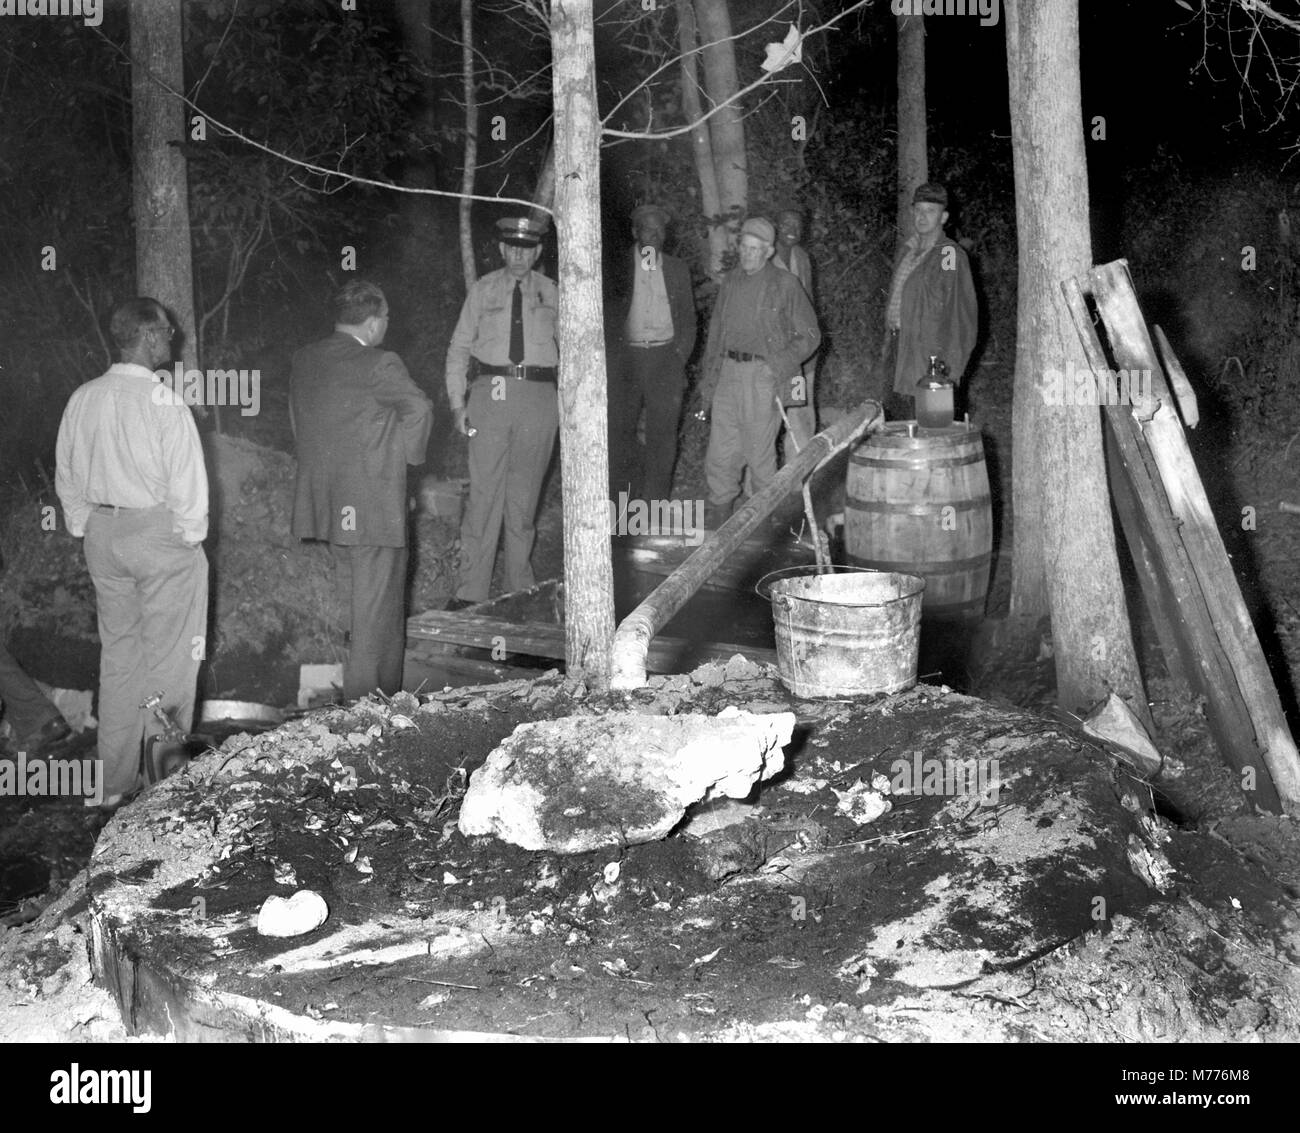 Law enforcement officials investigate the scene of an illegal backwoods moonshine still in rural Georgia, ca. 1955. Stock Photo